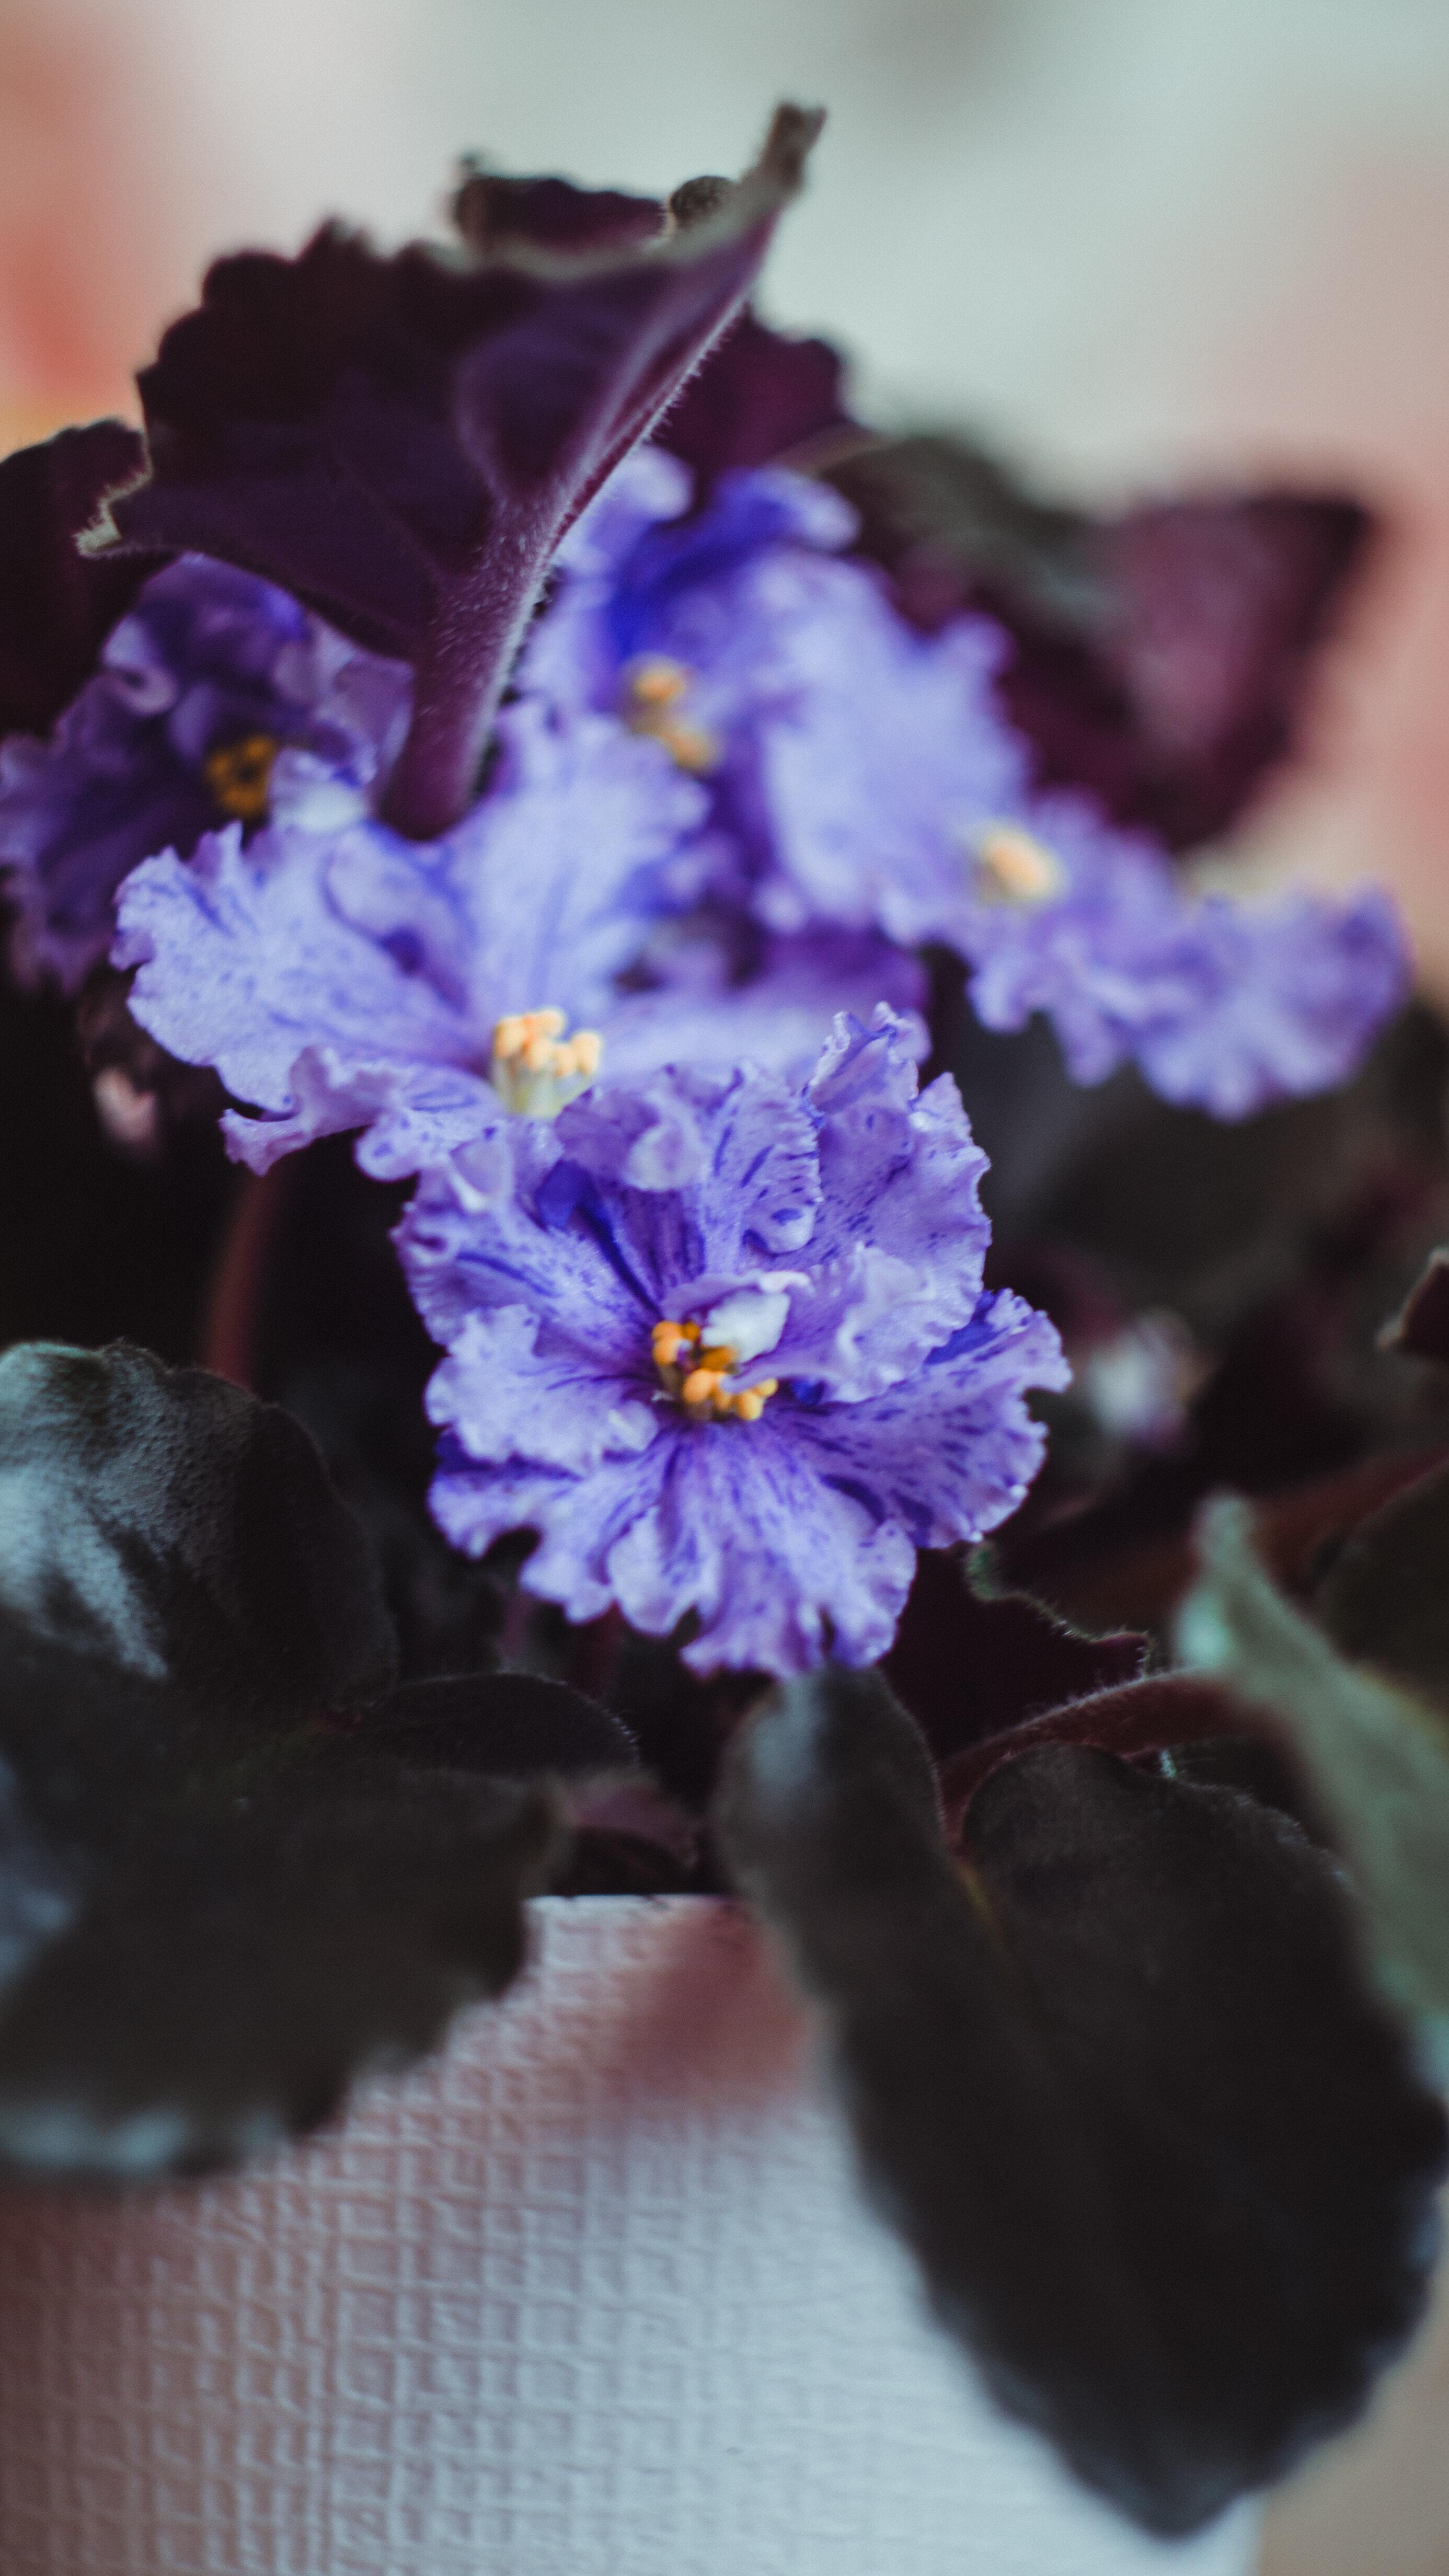 The African Violet is a pet-friendly non-toxic plant that has purple flowers and velvety green leaves.